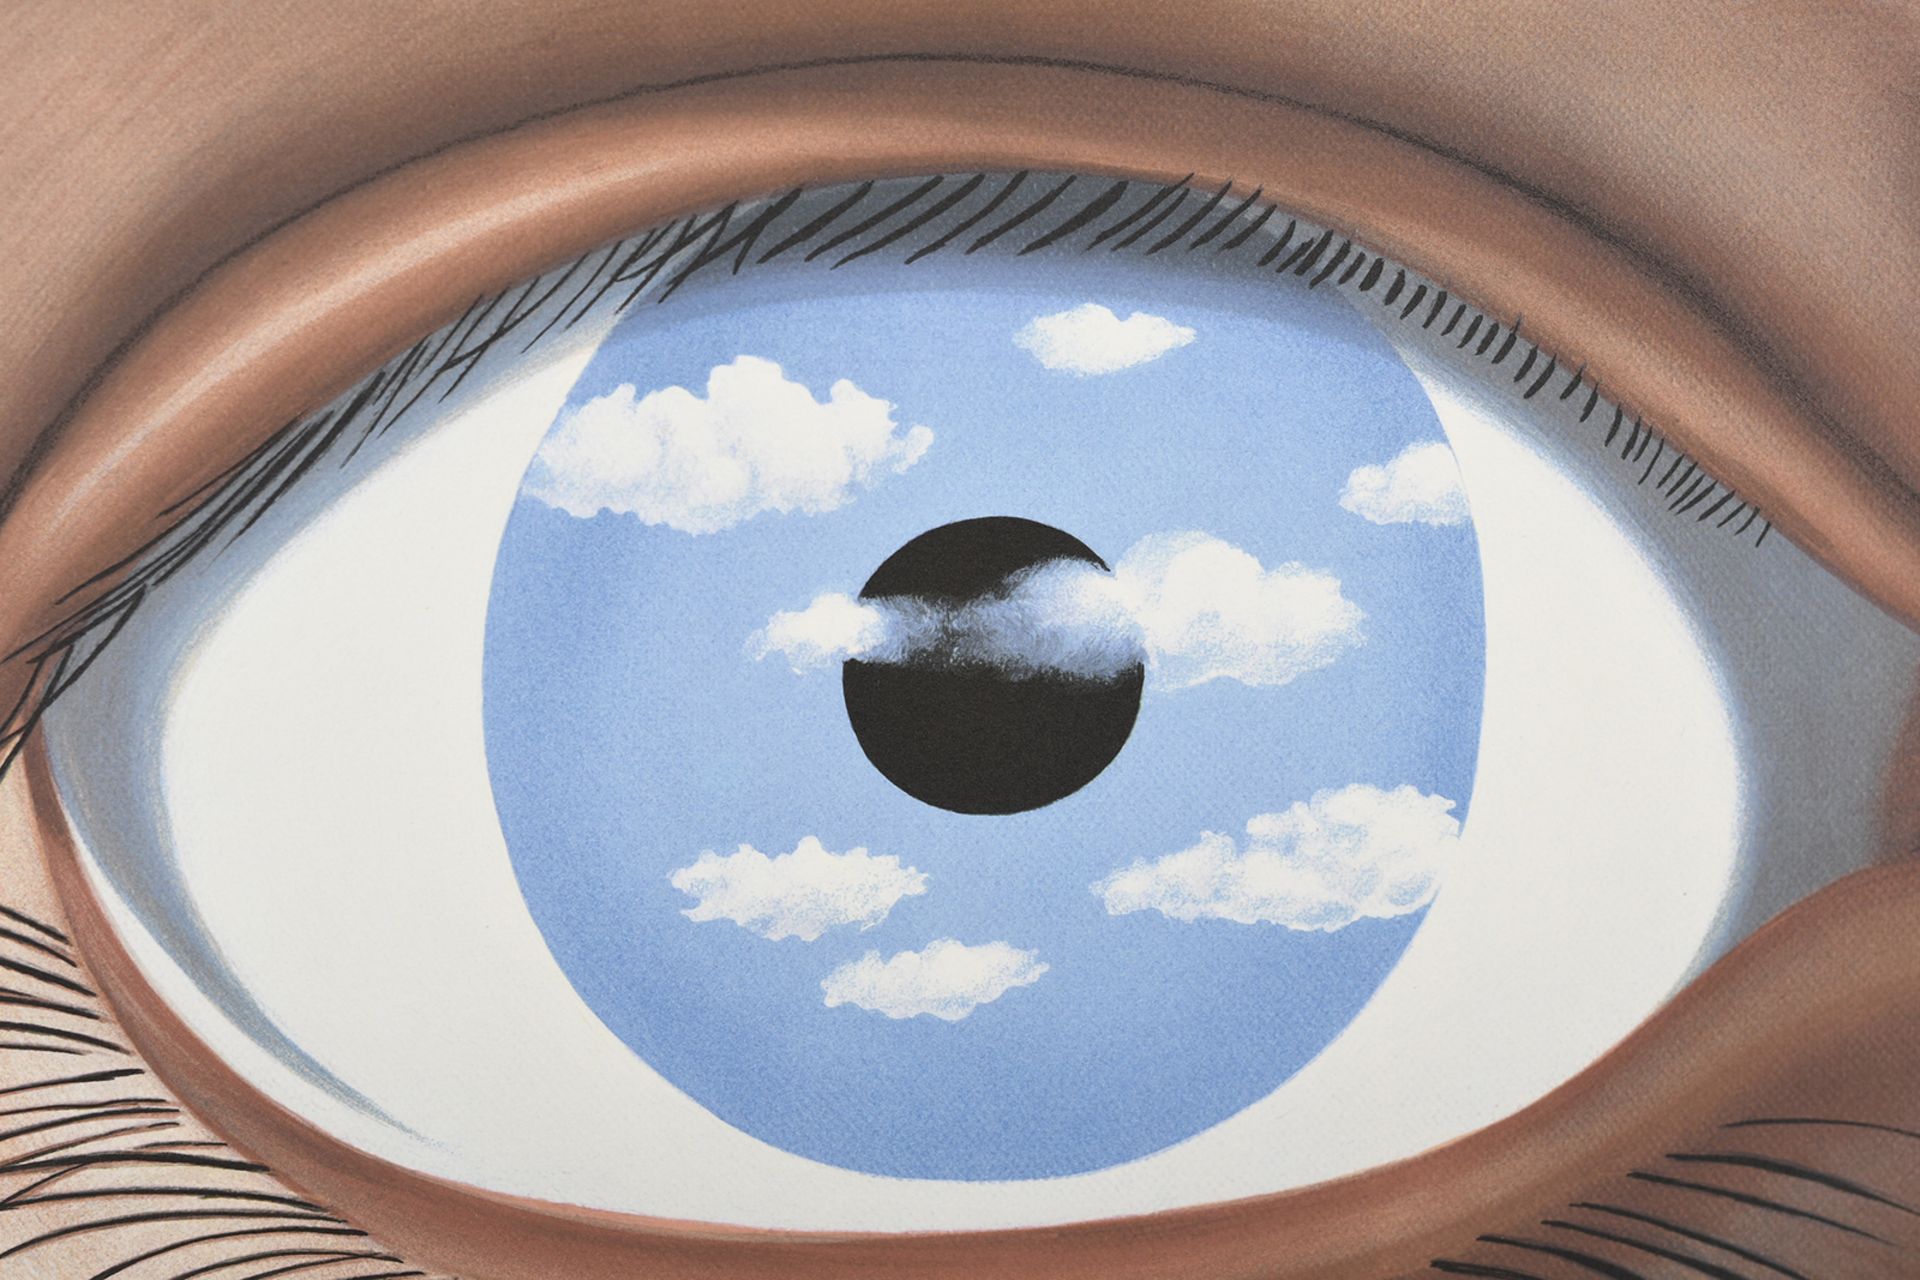 Limited Edition Magritte - Image 4 of 5